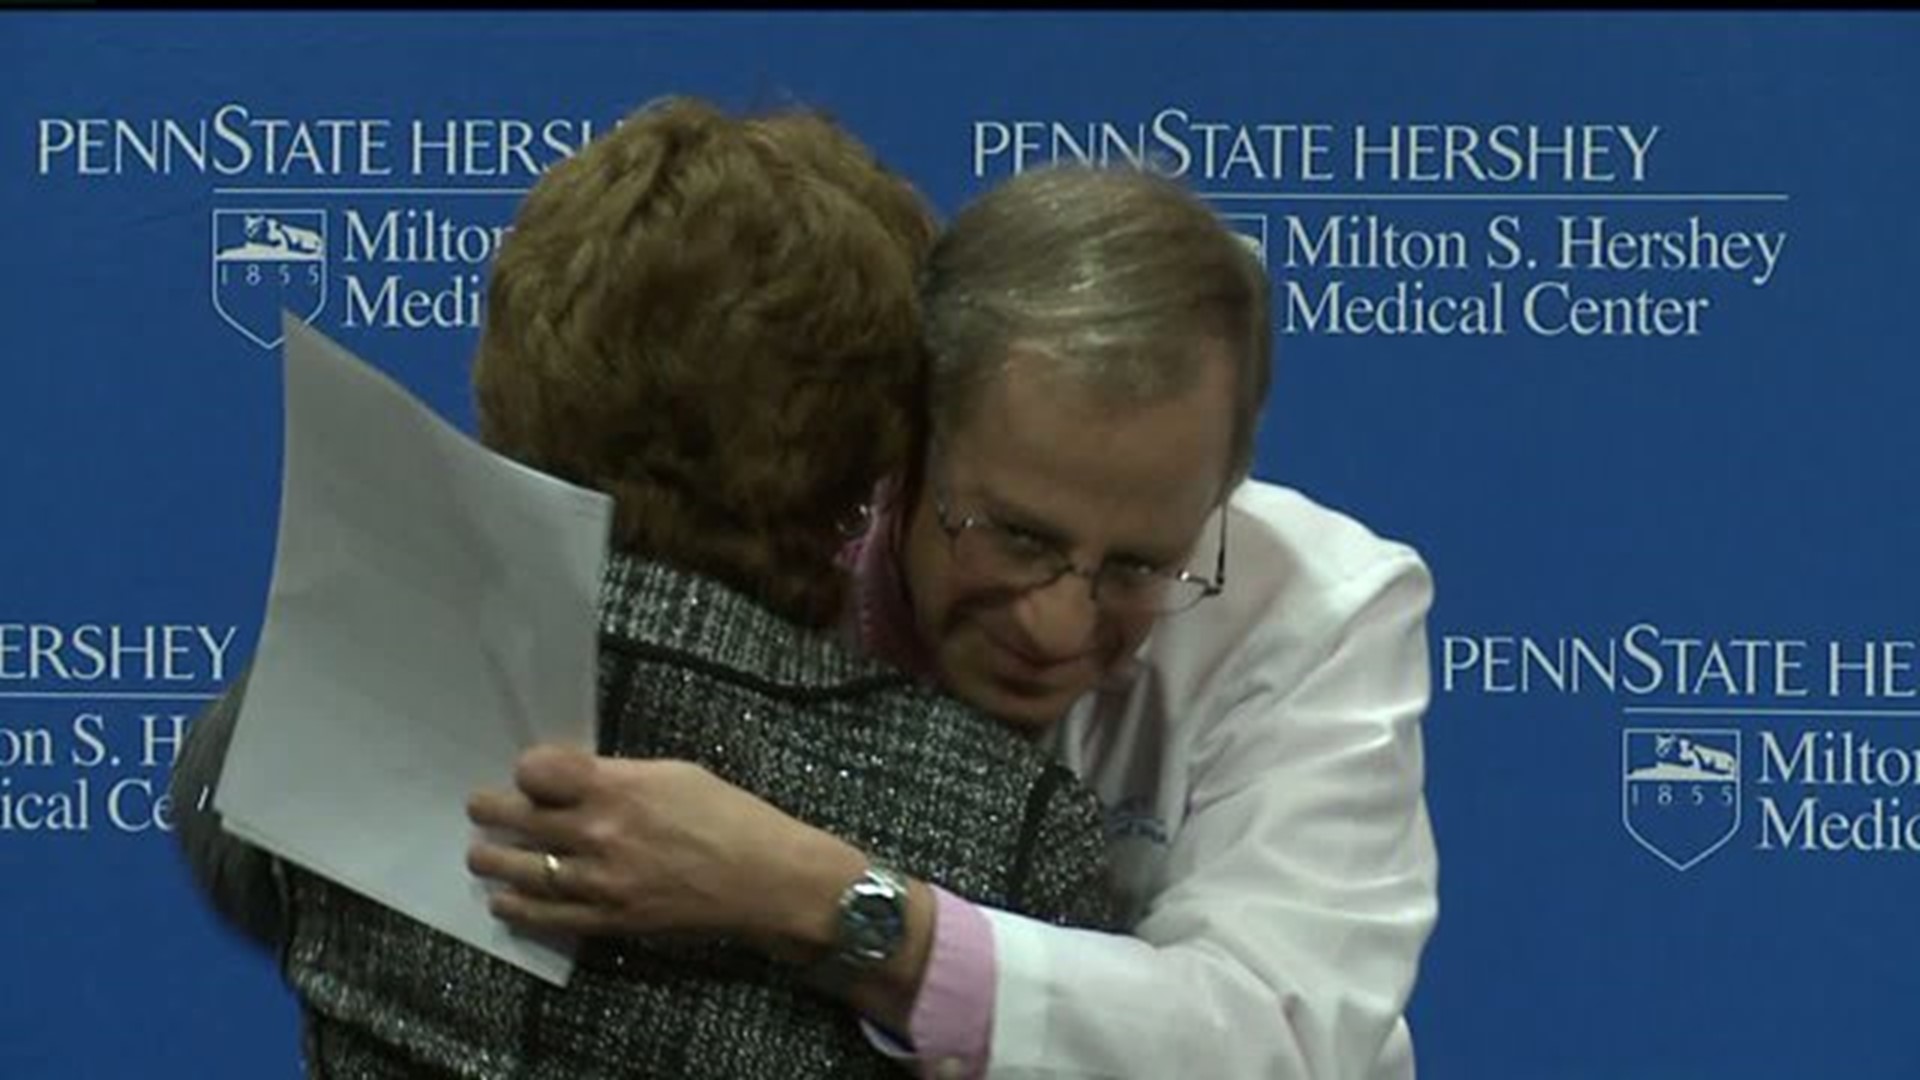 Doctor Awarded with Grant for Cancer Research